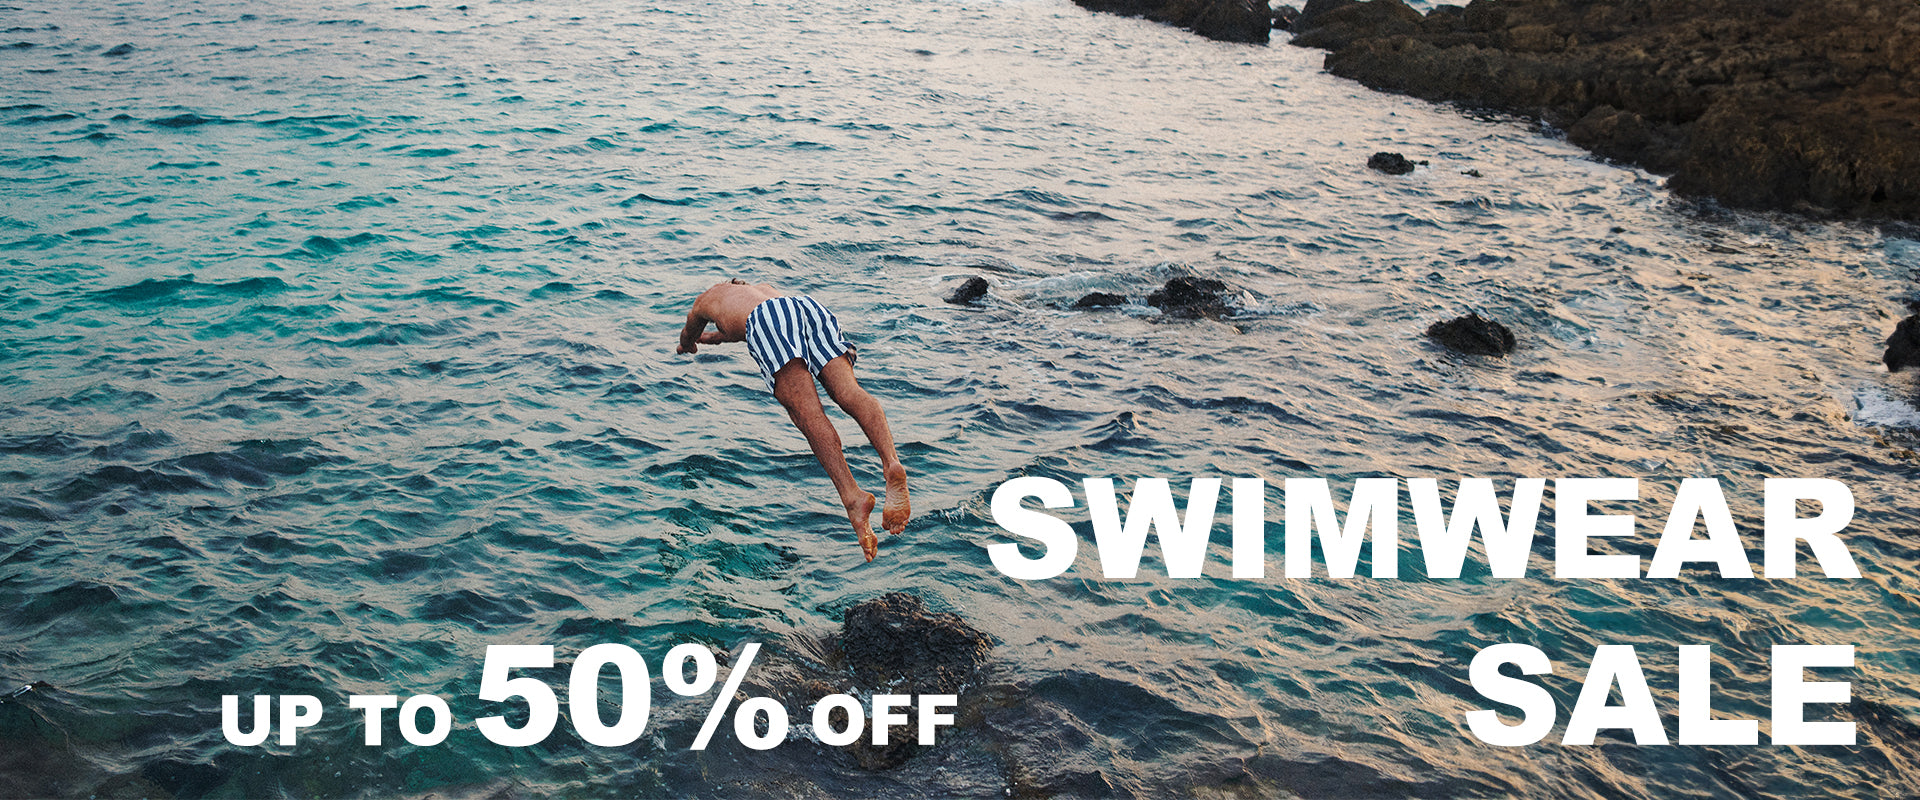 mens-swimwear-sale-up-to-fifty-percent-off